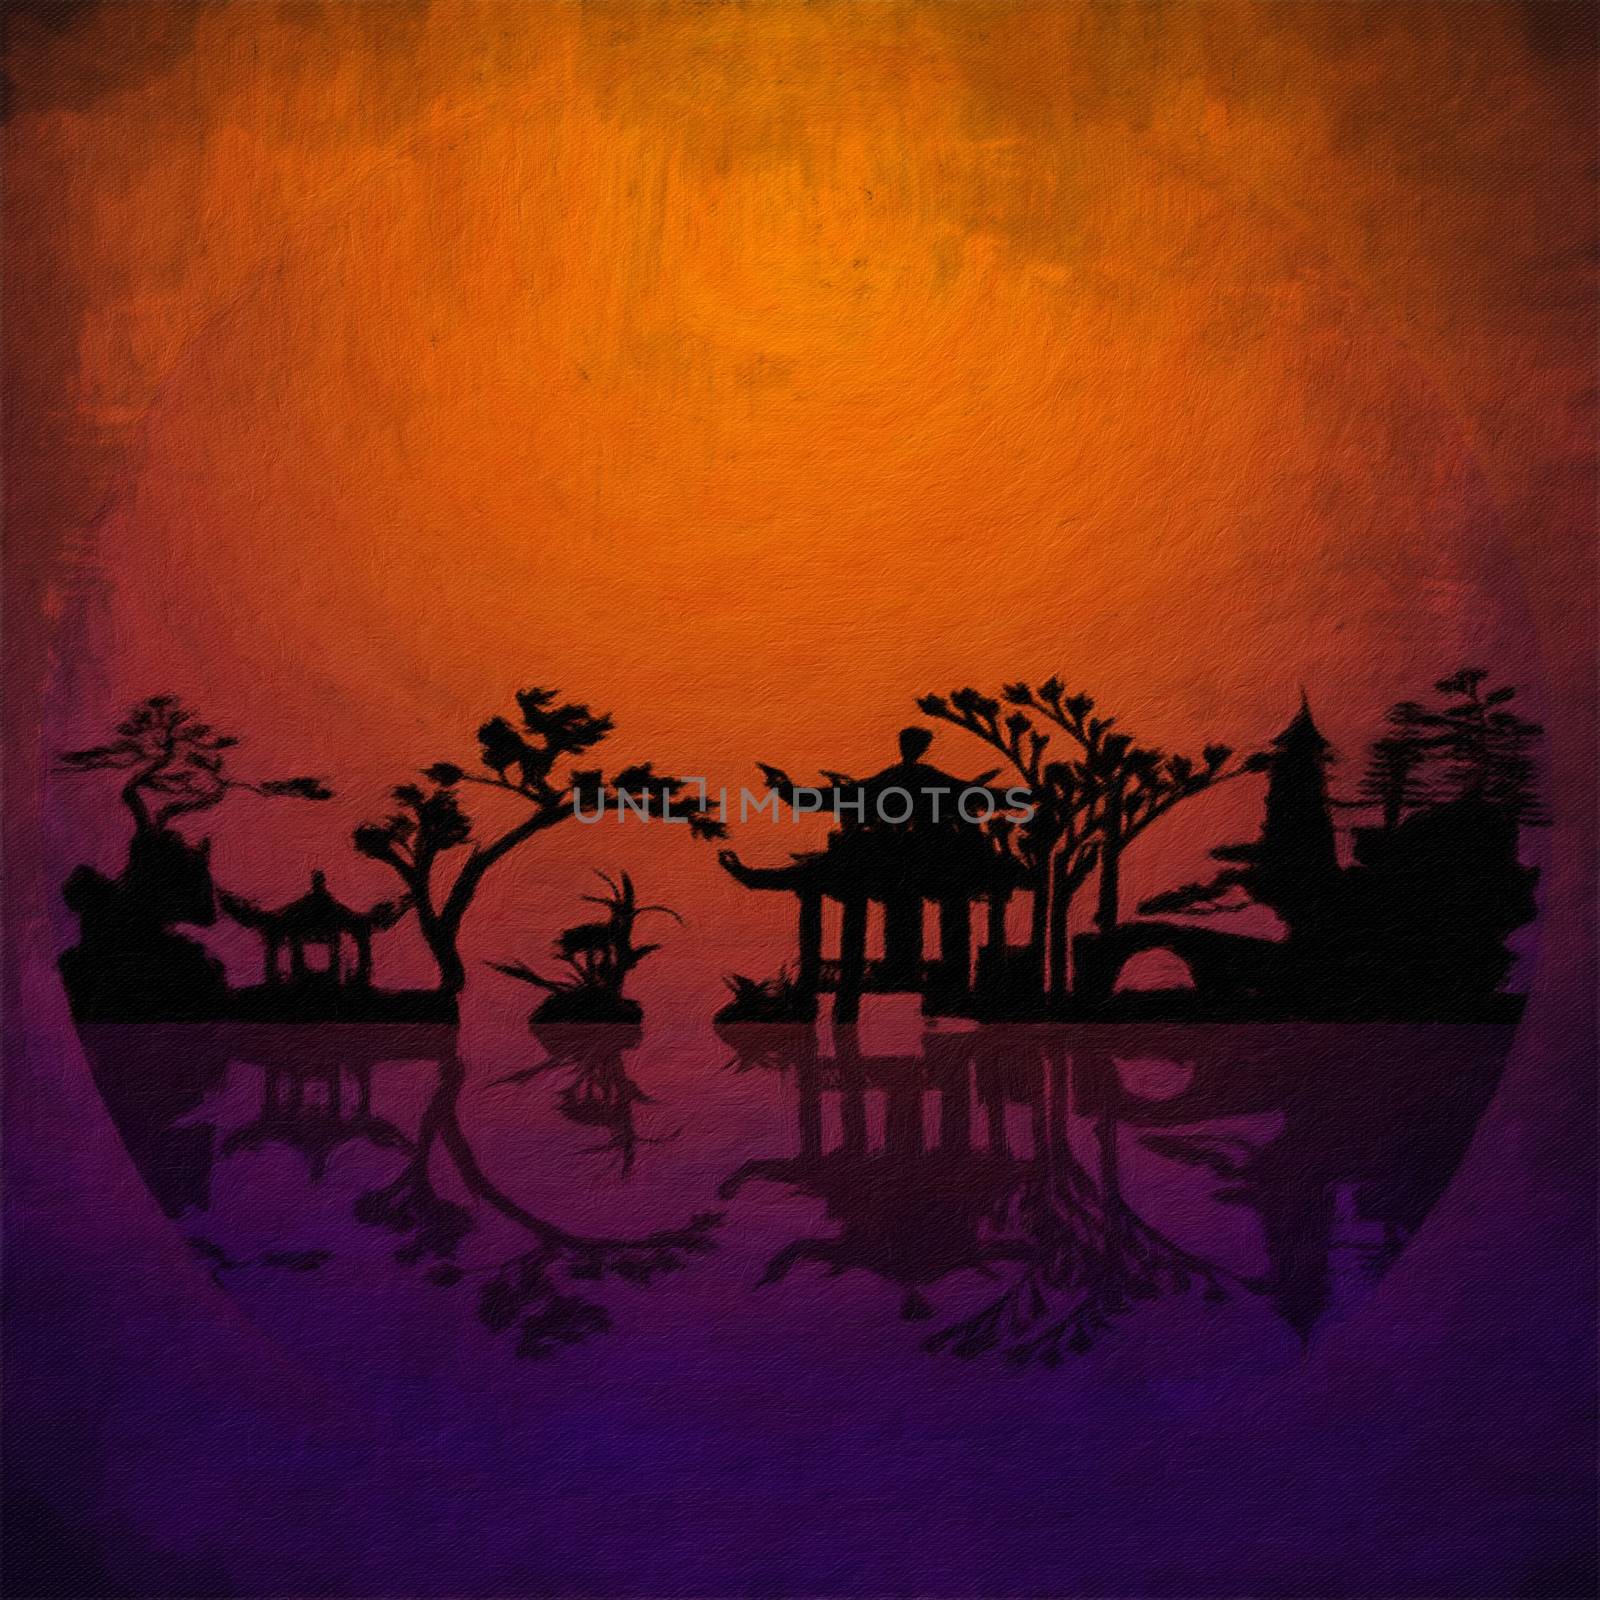 Asia Landscape Silhouettes by applesstock